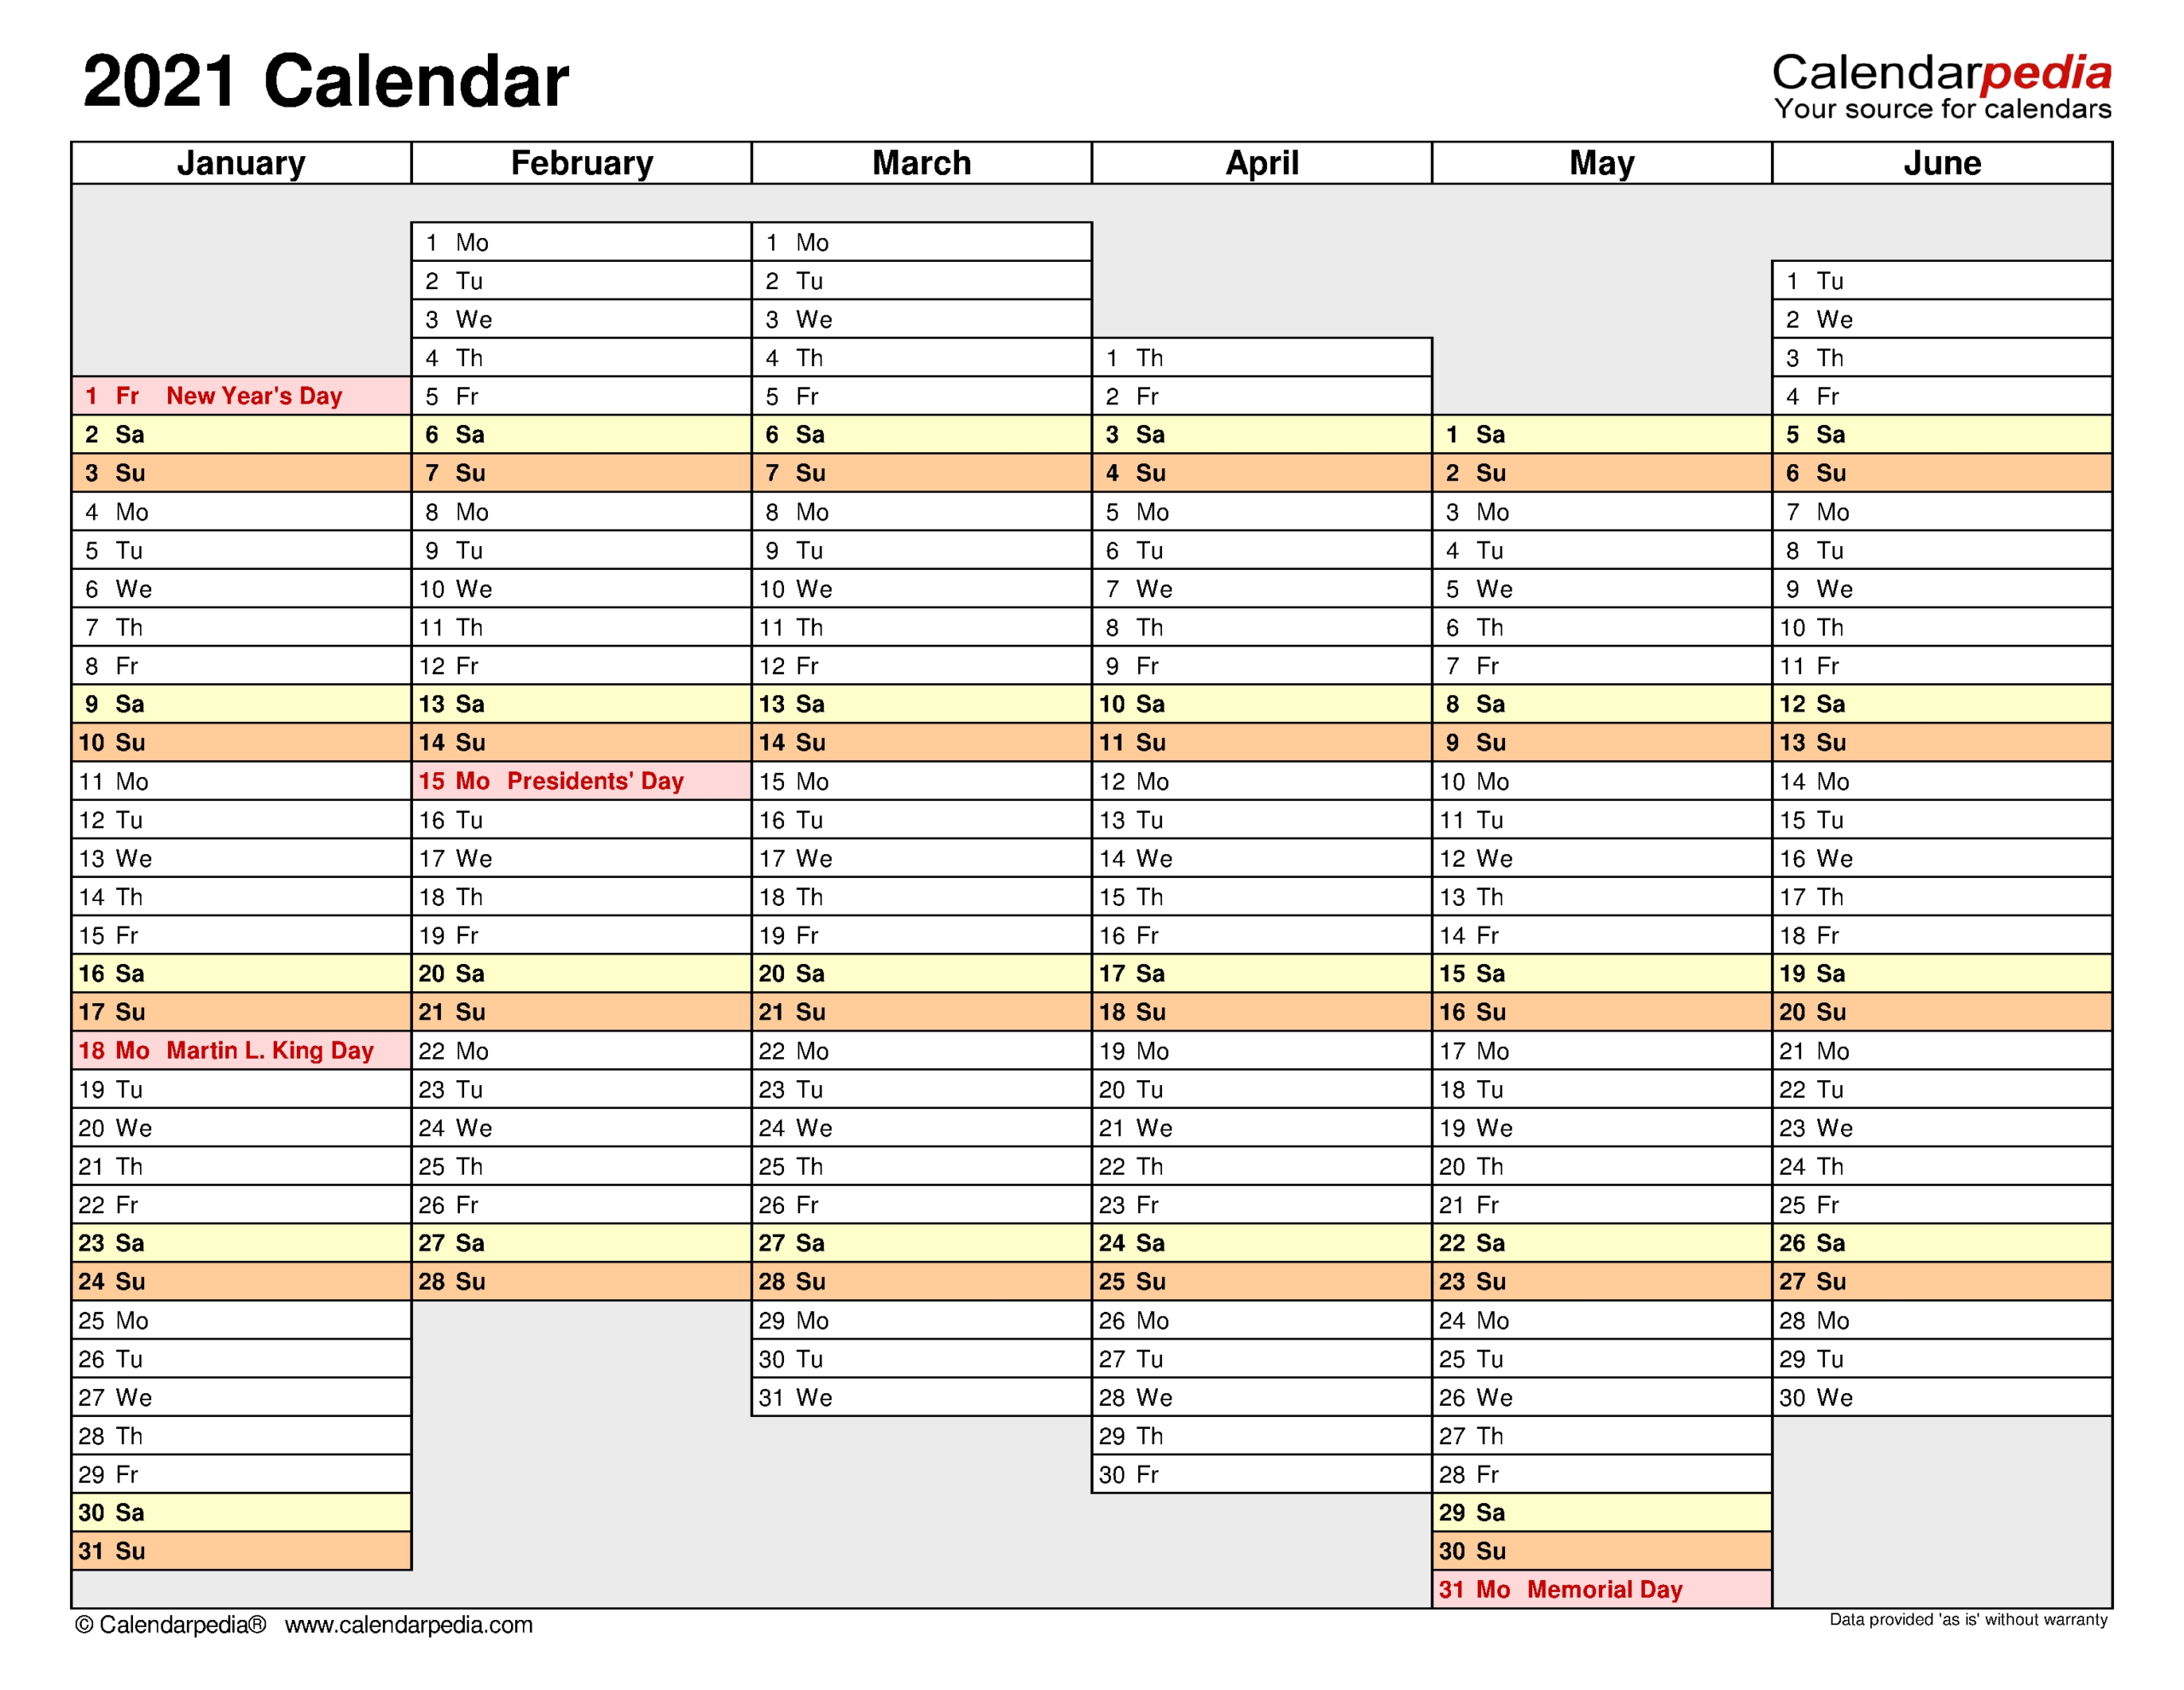 How To Annual Hr Planning Calendar Excel | Get Your